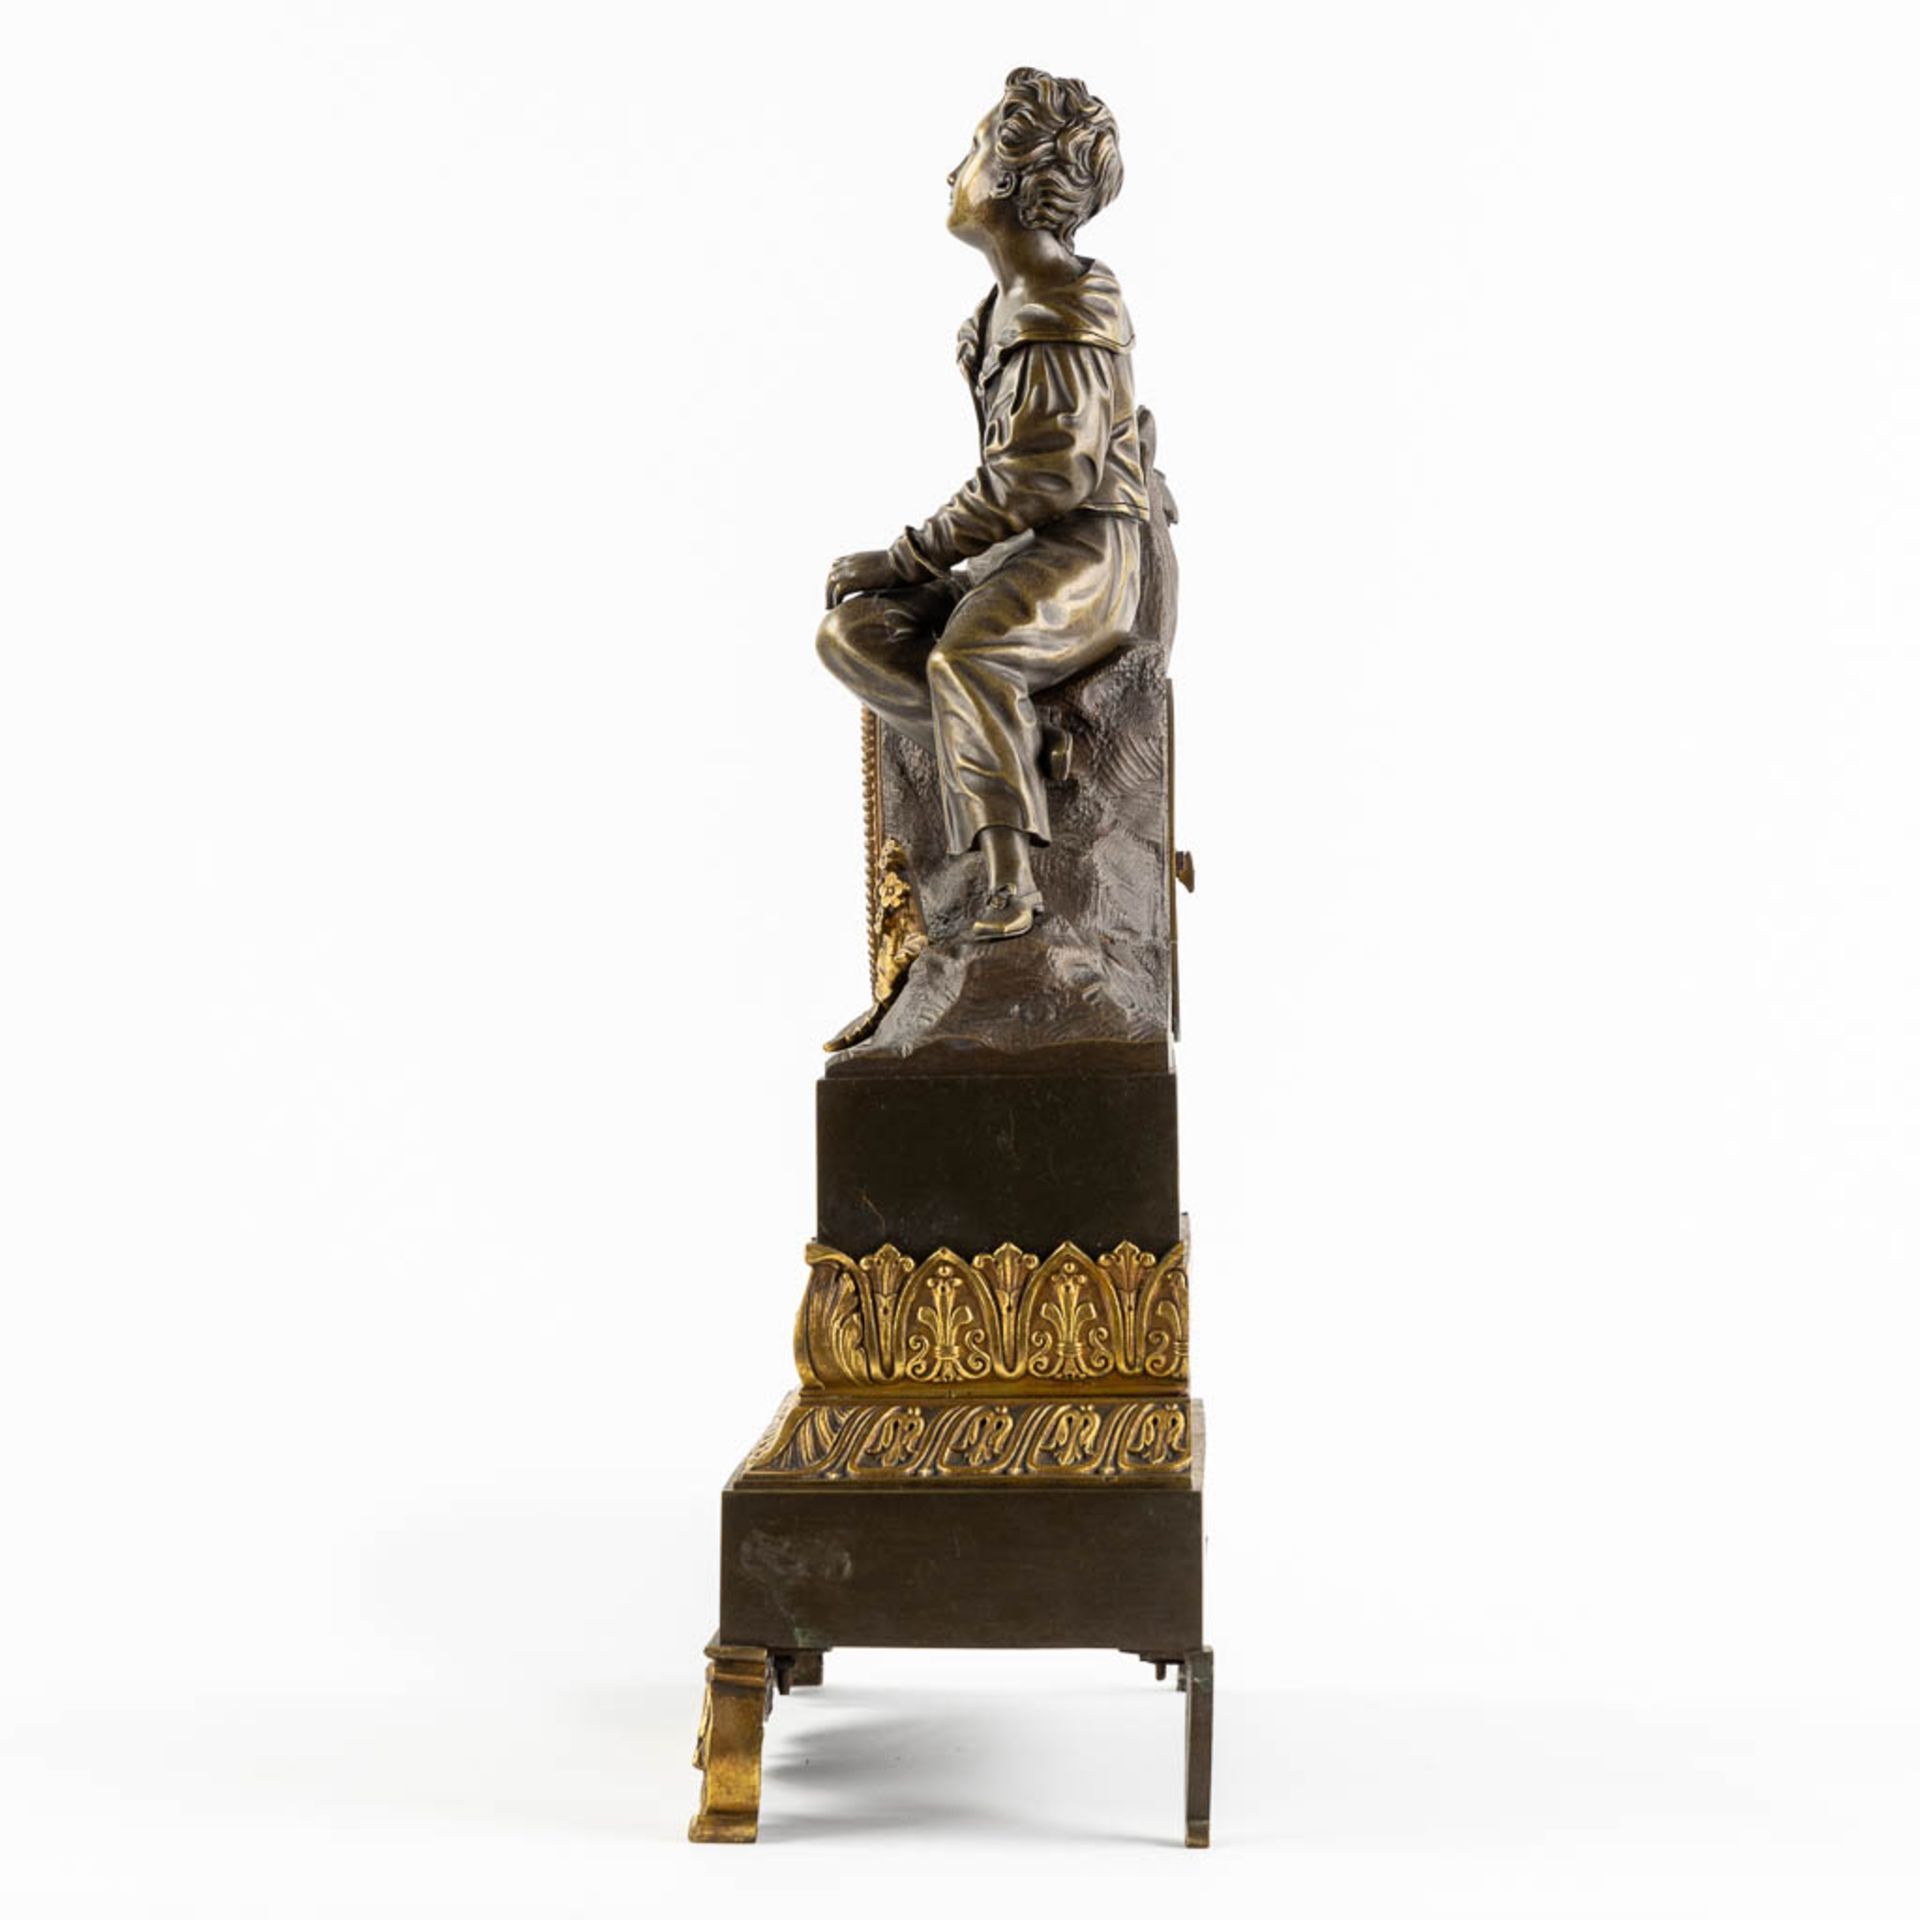 A mantle clock, gilt and patinated bronze, Empire style. 19th C. (L:13 x W:34 x H:46 cm) - Image 6 of 9